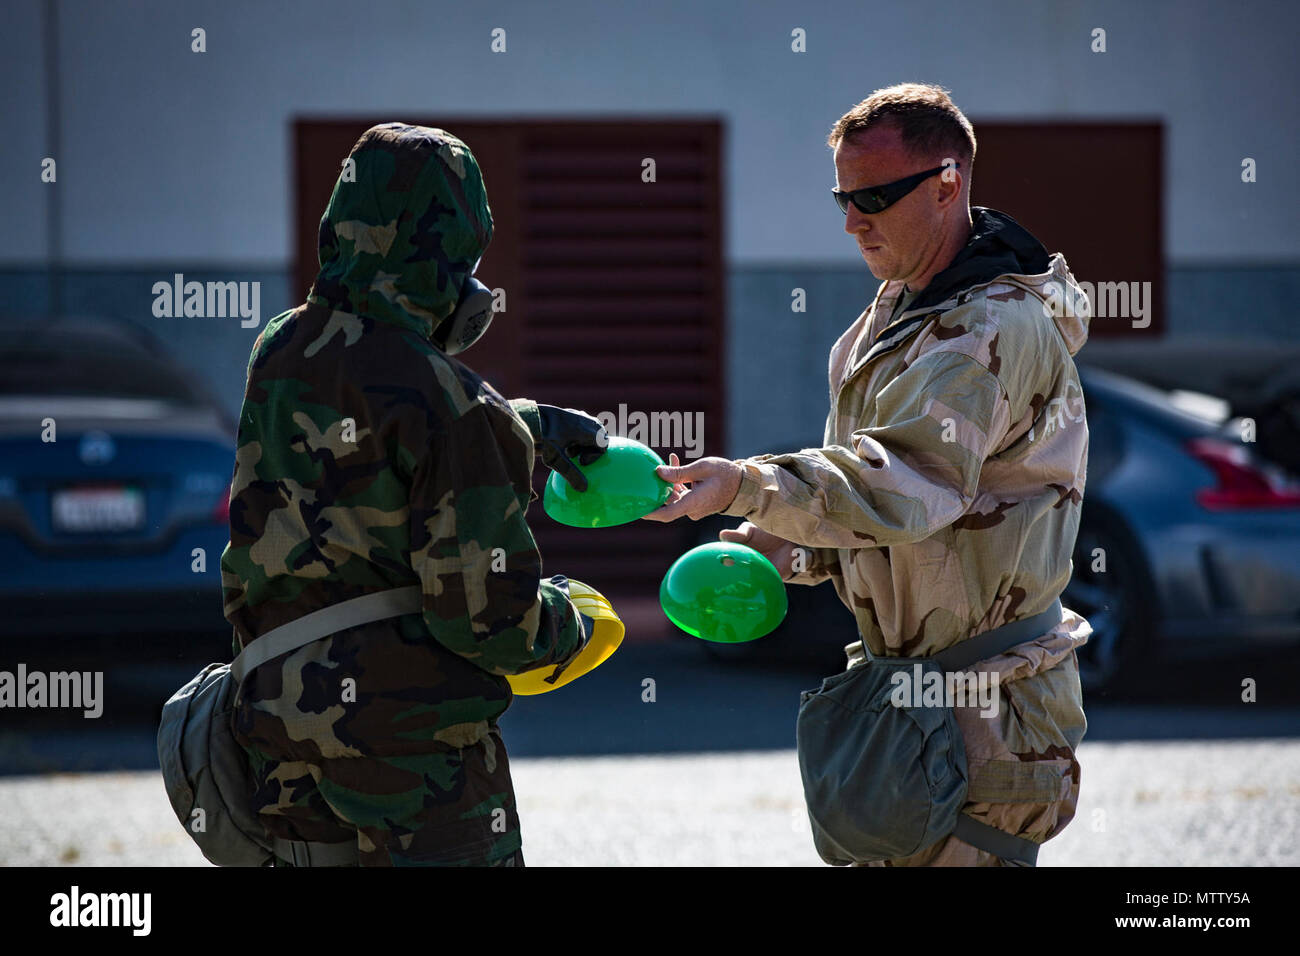 U.S. Marine Staff Sgt. Philip Barnes hands out cones to conduct Reconnaissance, Surveillance and Decontamination Training aboard Marine Corps Base Camp Pendleton, Calif., April 26, 2017. The cones serve as simulated threats and hazards in a chemical, biological, radiological and nuclear environment. The purpose of this training is to accomplish missions within CBRN environment.  Barnes is the current CBRN Chief for 1st Maintenance Battalion, 1st Marine Logistics Group. Stock Photo